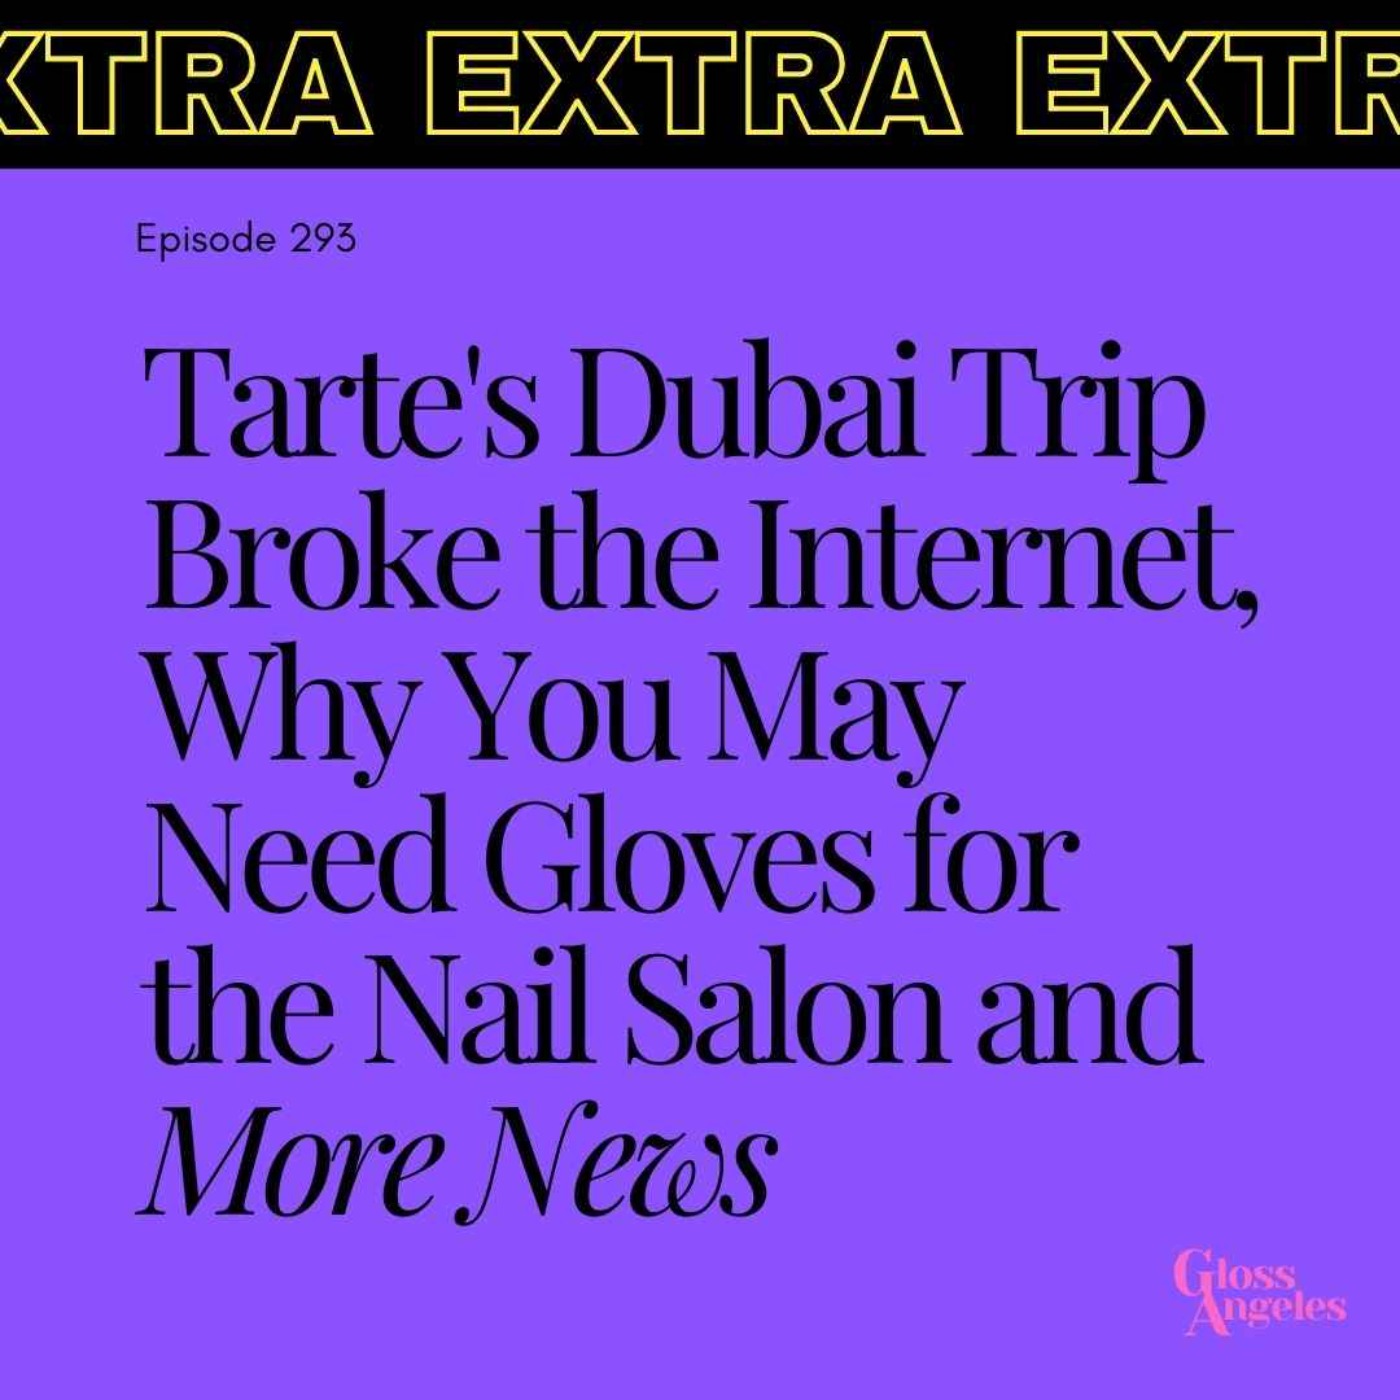 Tarte's Dubai Trip Broke the Internet, Why You May Need Gloves For the Nail Salon and More News